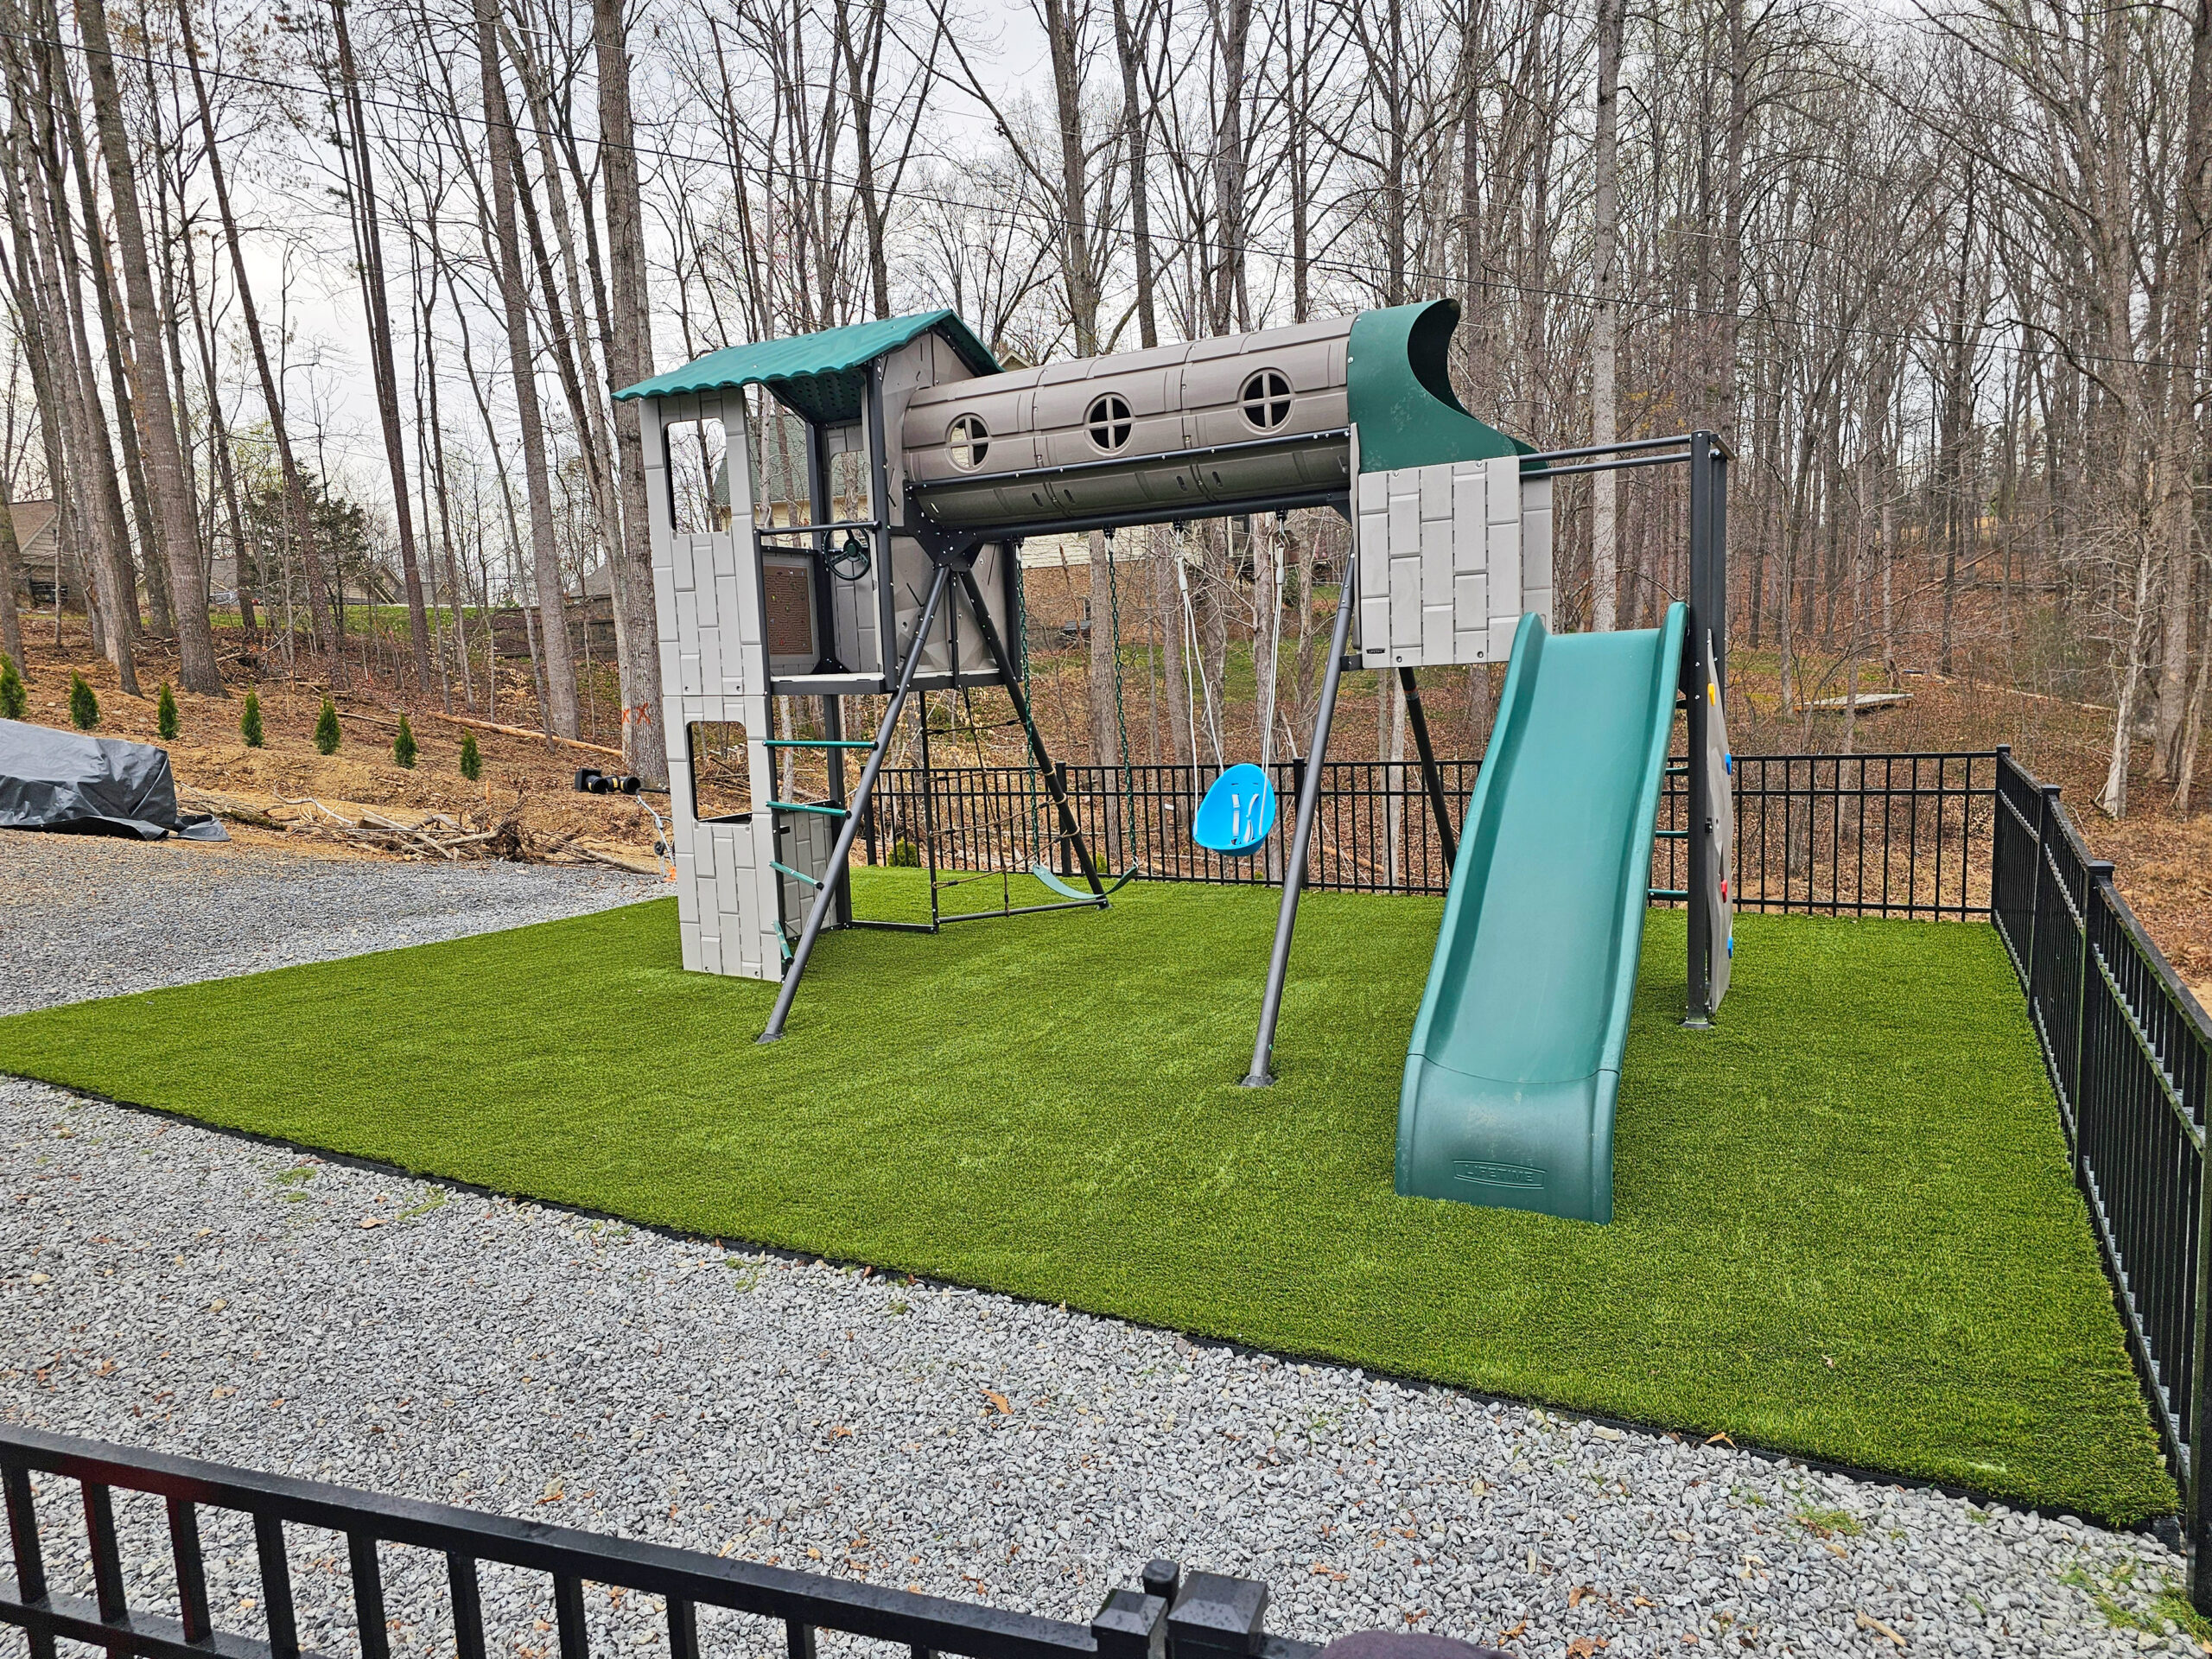 A newly installed Synthetic Turf Backyard Playground alongside a serene water body, blending natural beauty with playful design.